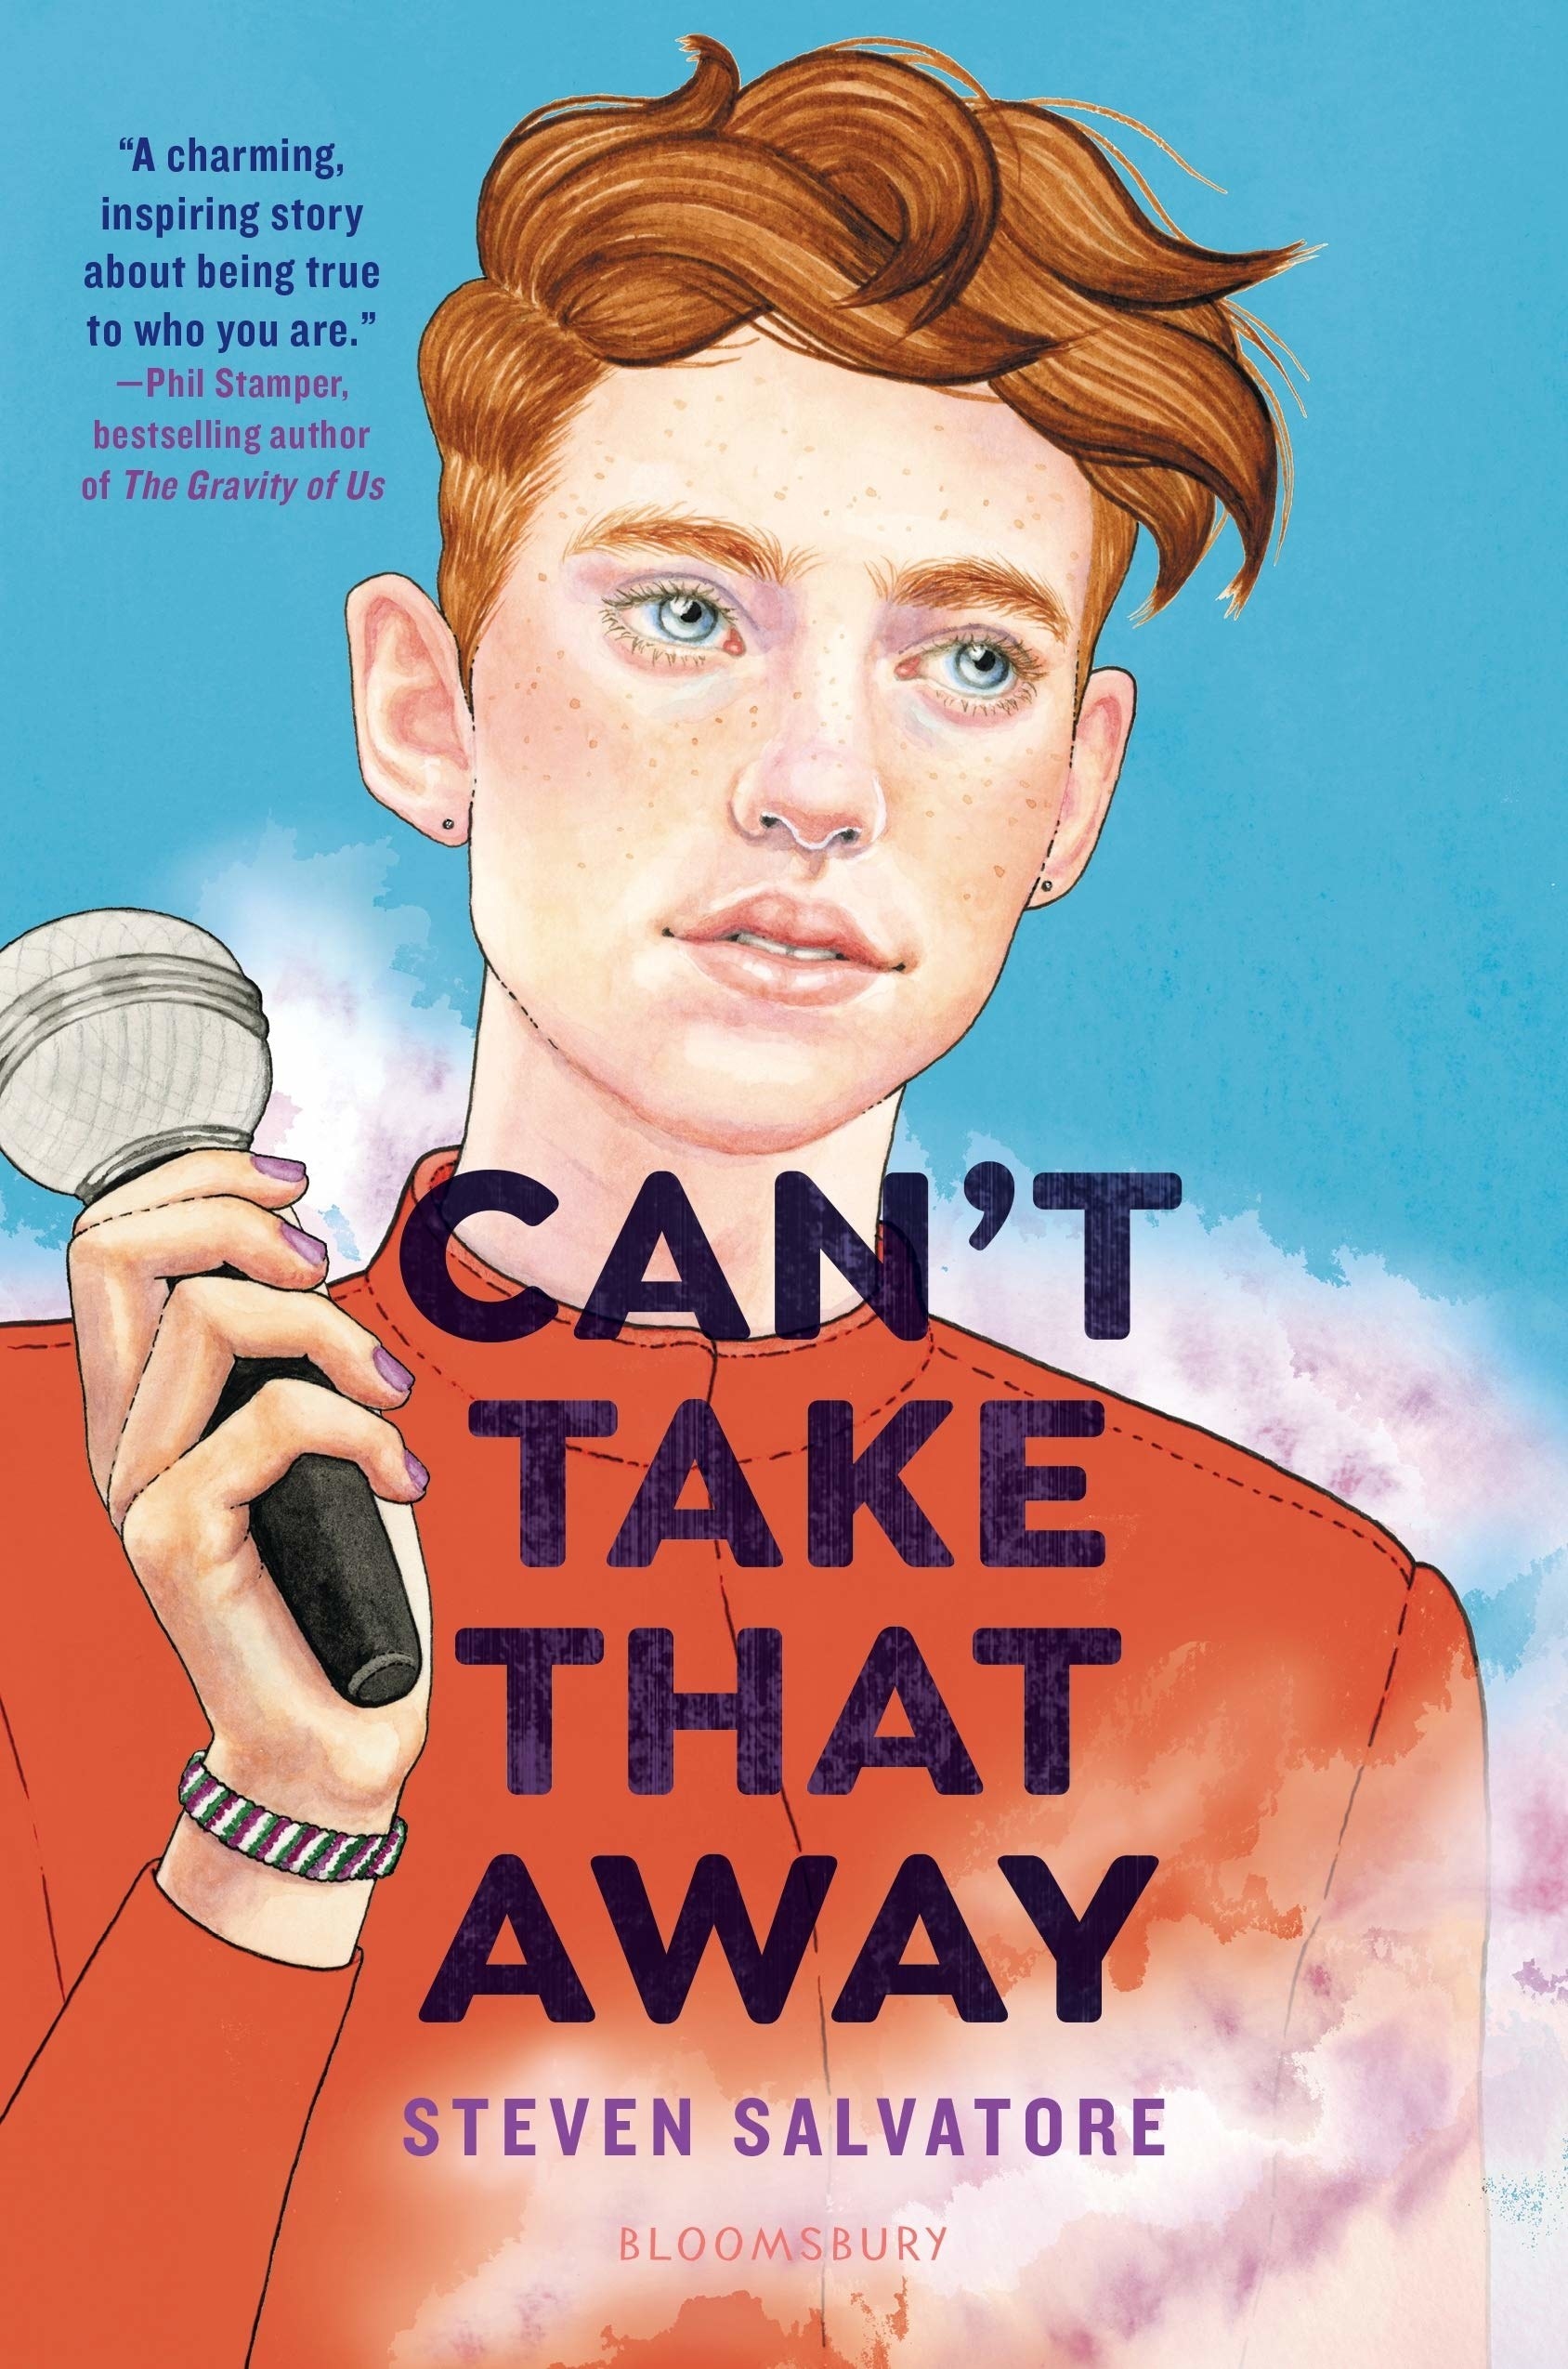 A freckled redhead boy holds a microphone